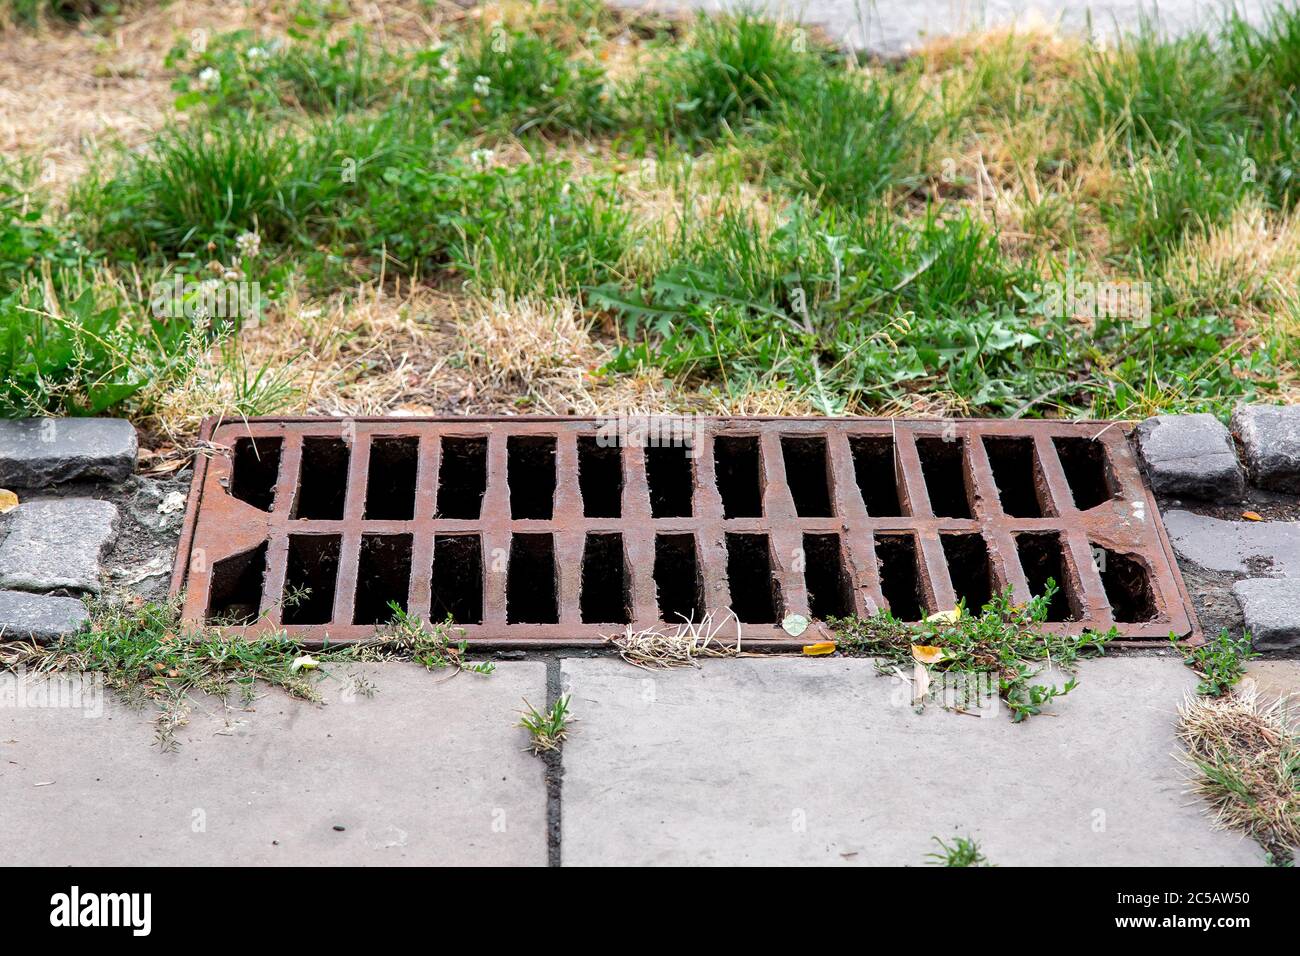 storm hatch sewage with a rusty grill on the edge of a pedestrian stone walkway overgrown with weeds in the park. Stock Photo